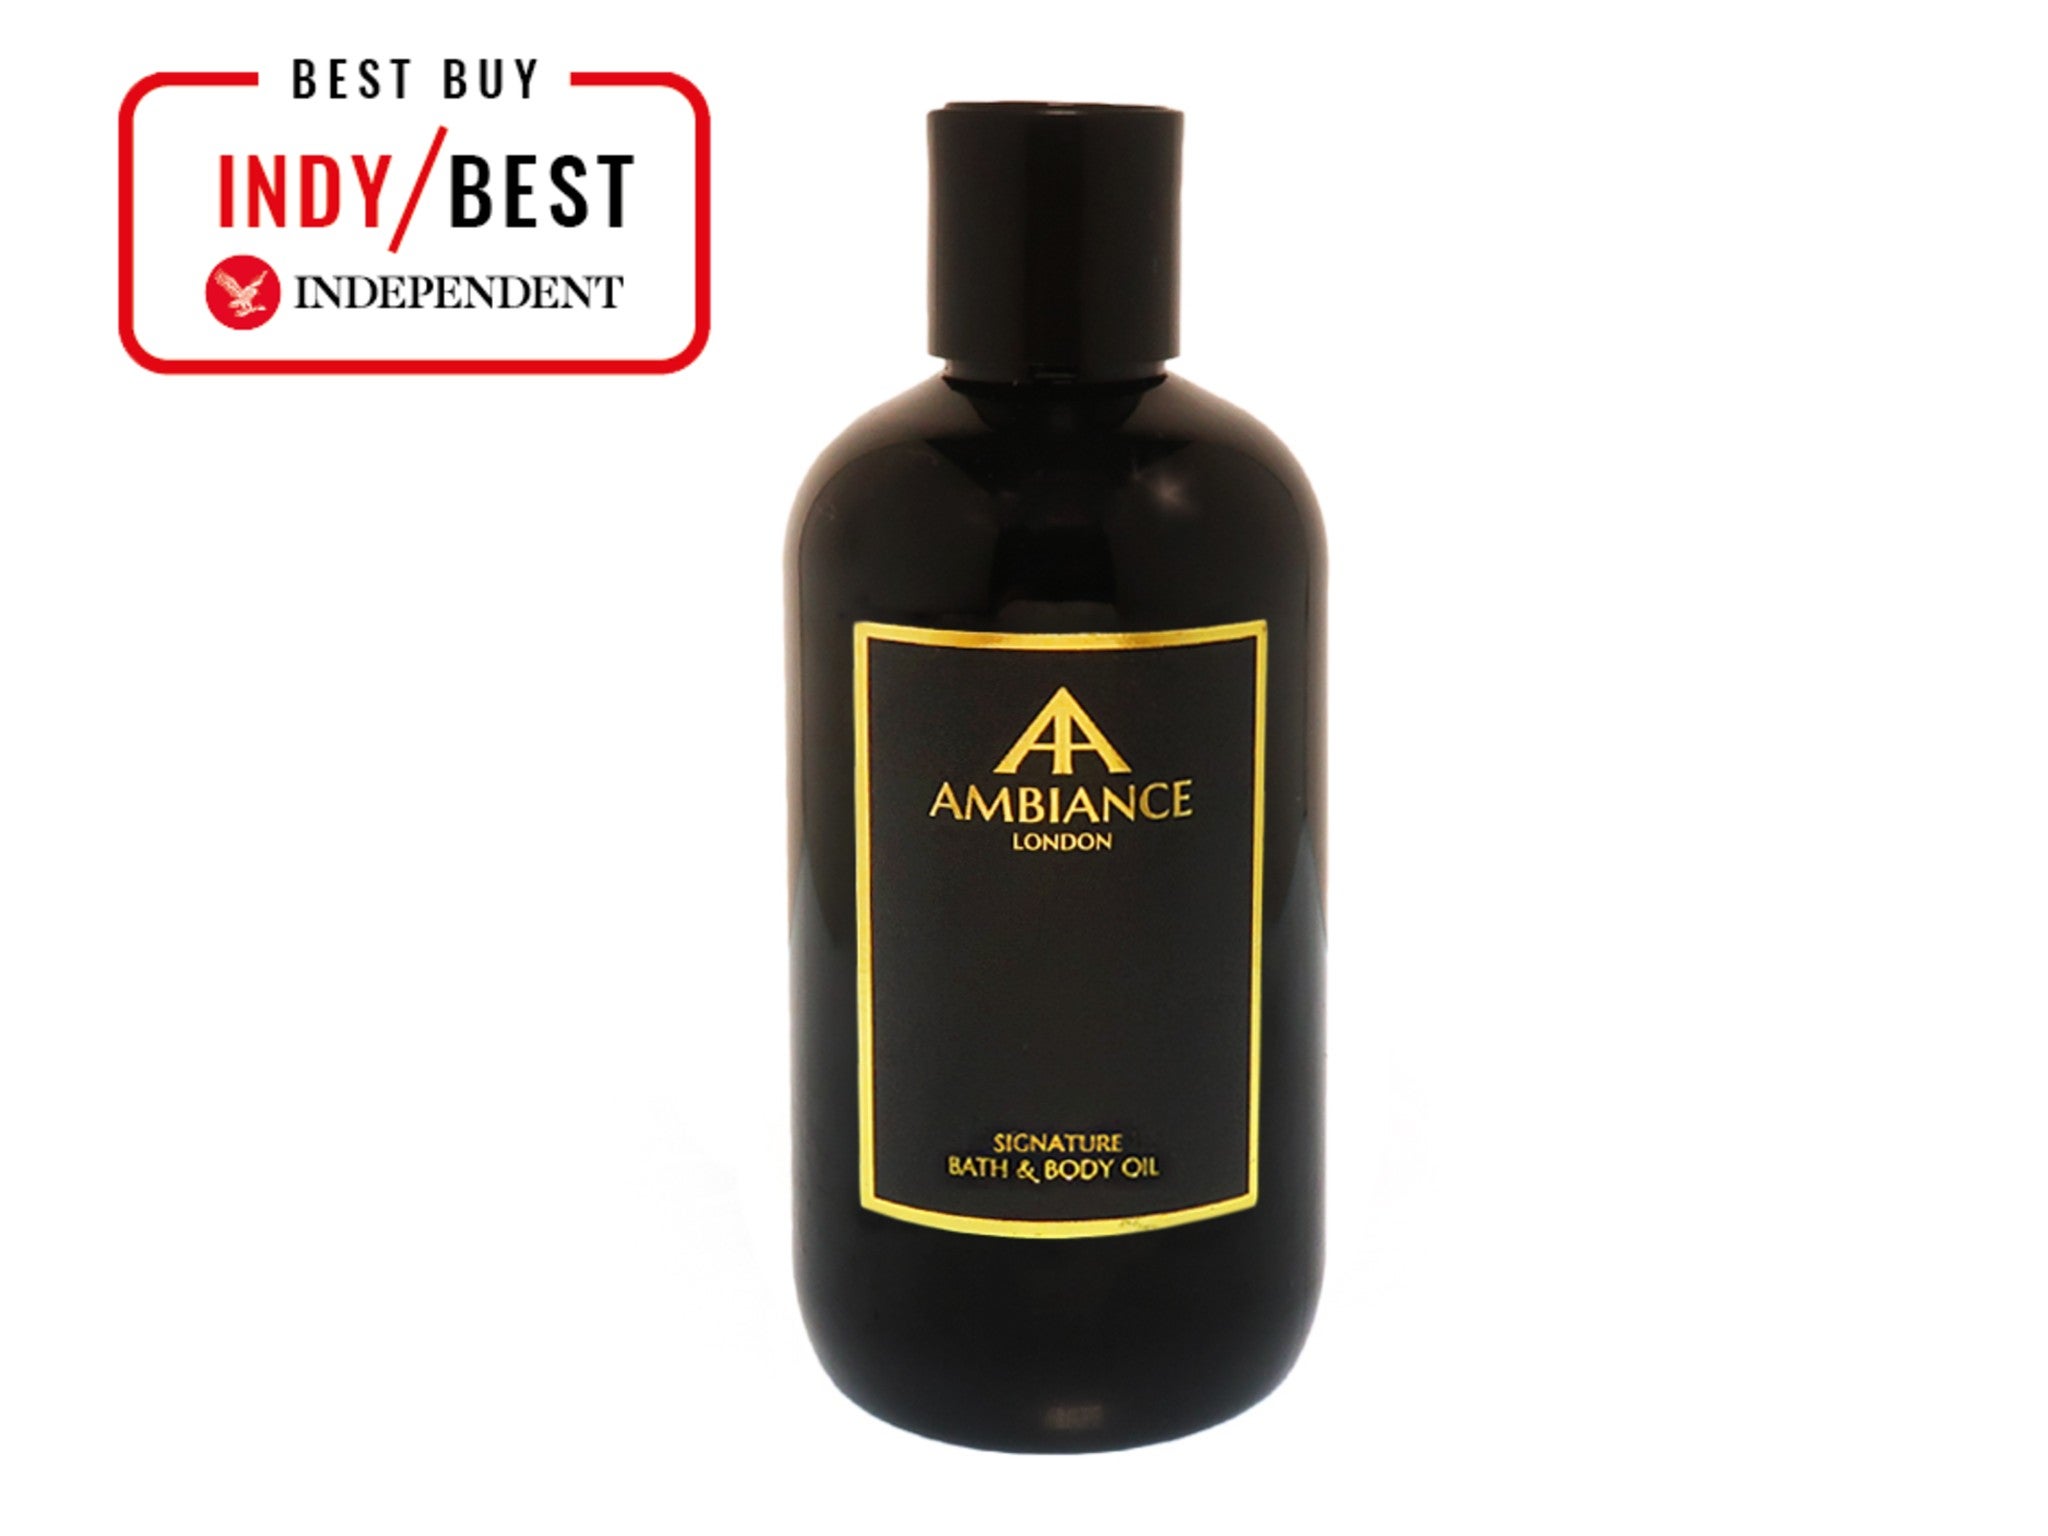 Ancienne Ambiance signature luxury oil for bath and body, 250ml indybest.jpeg